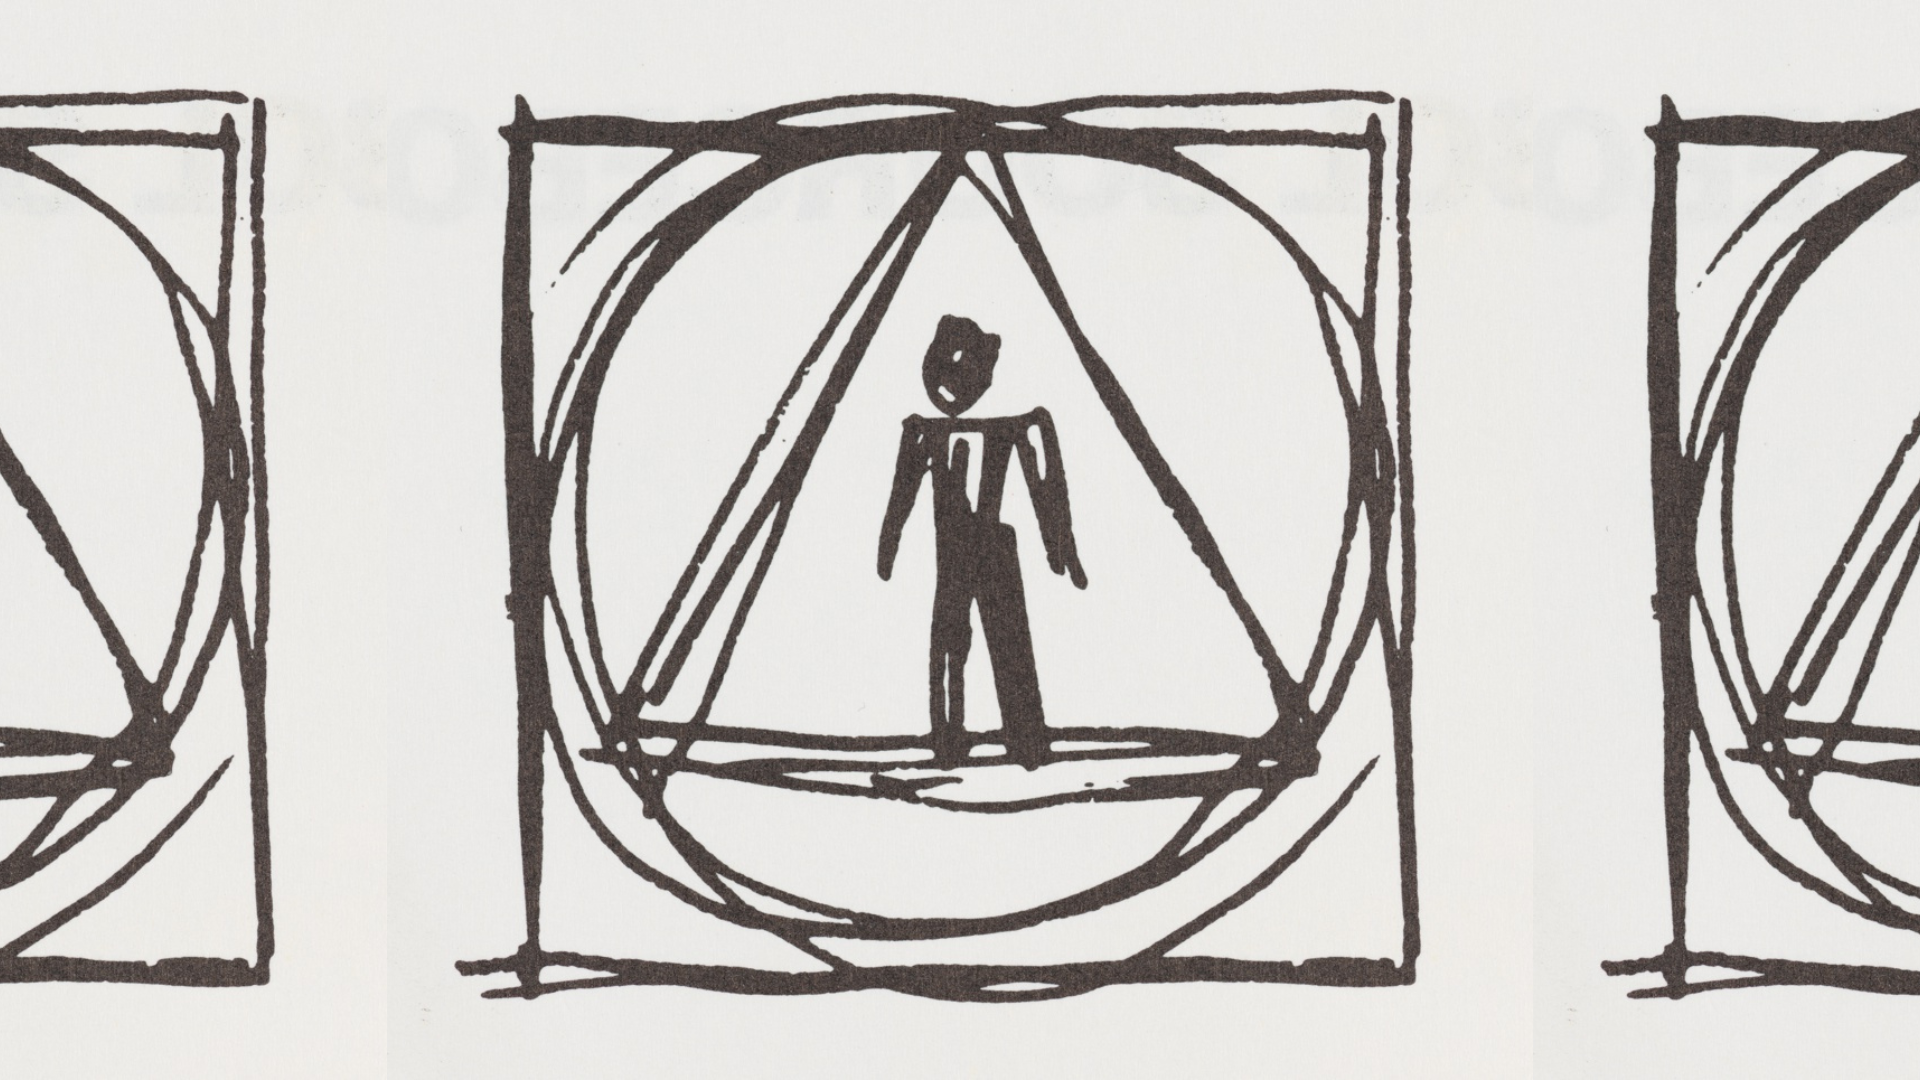 A hastily drawn symbol in black ink showing a human figure standing inside a triangle, which is inside a circle, which is inside a square.